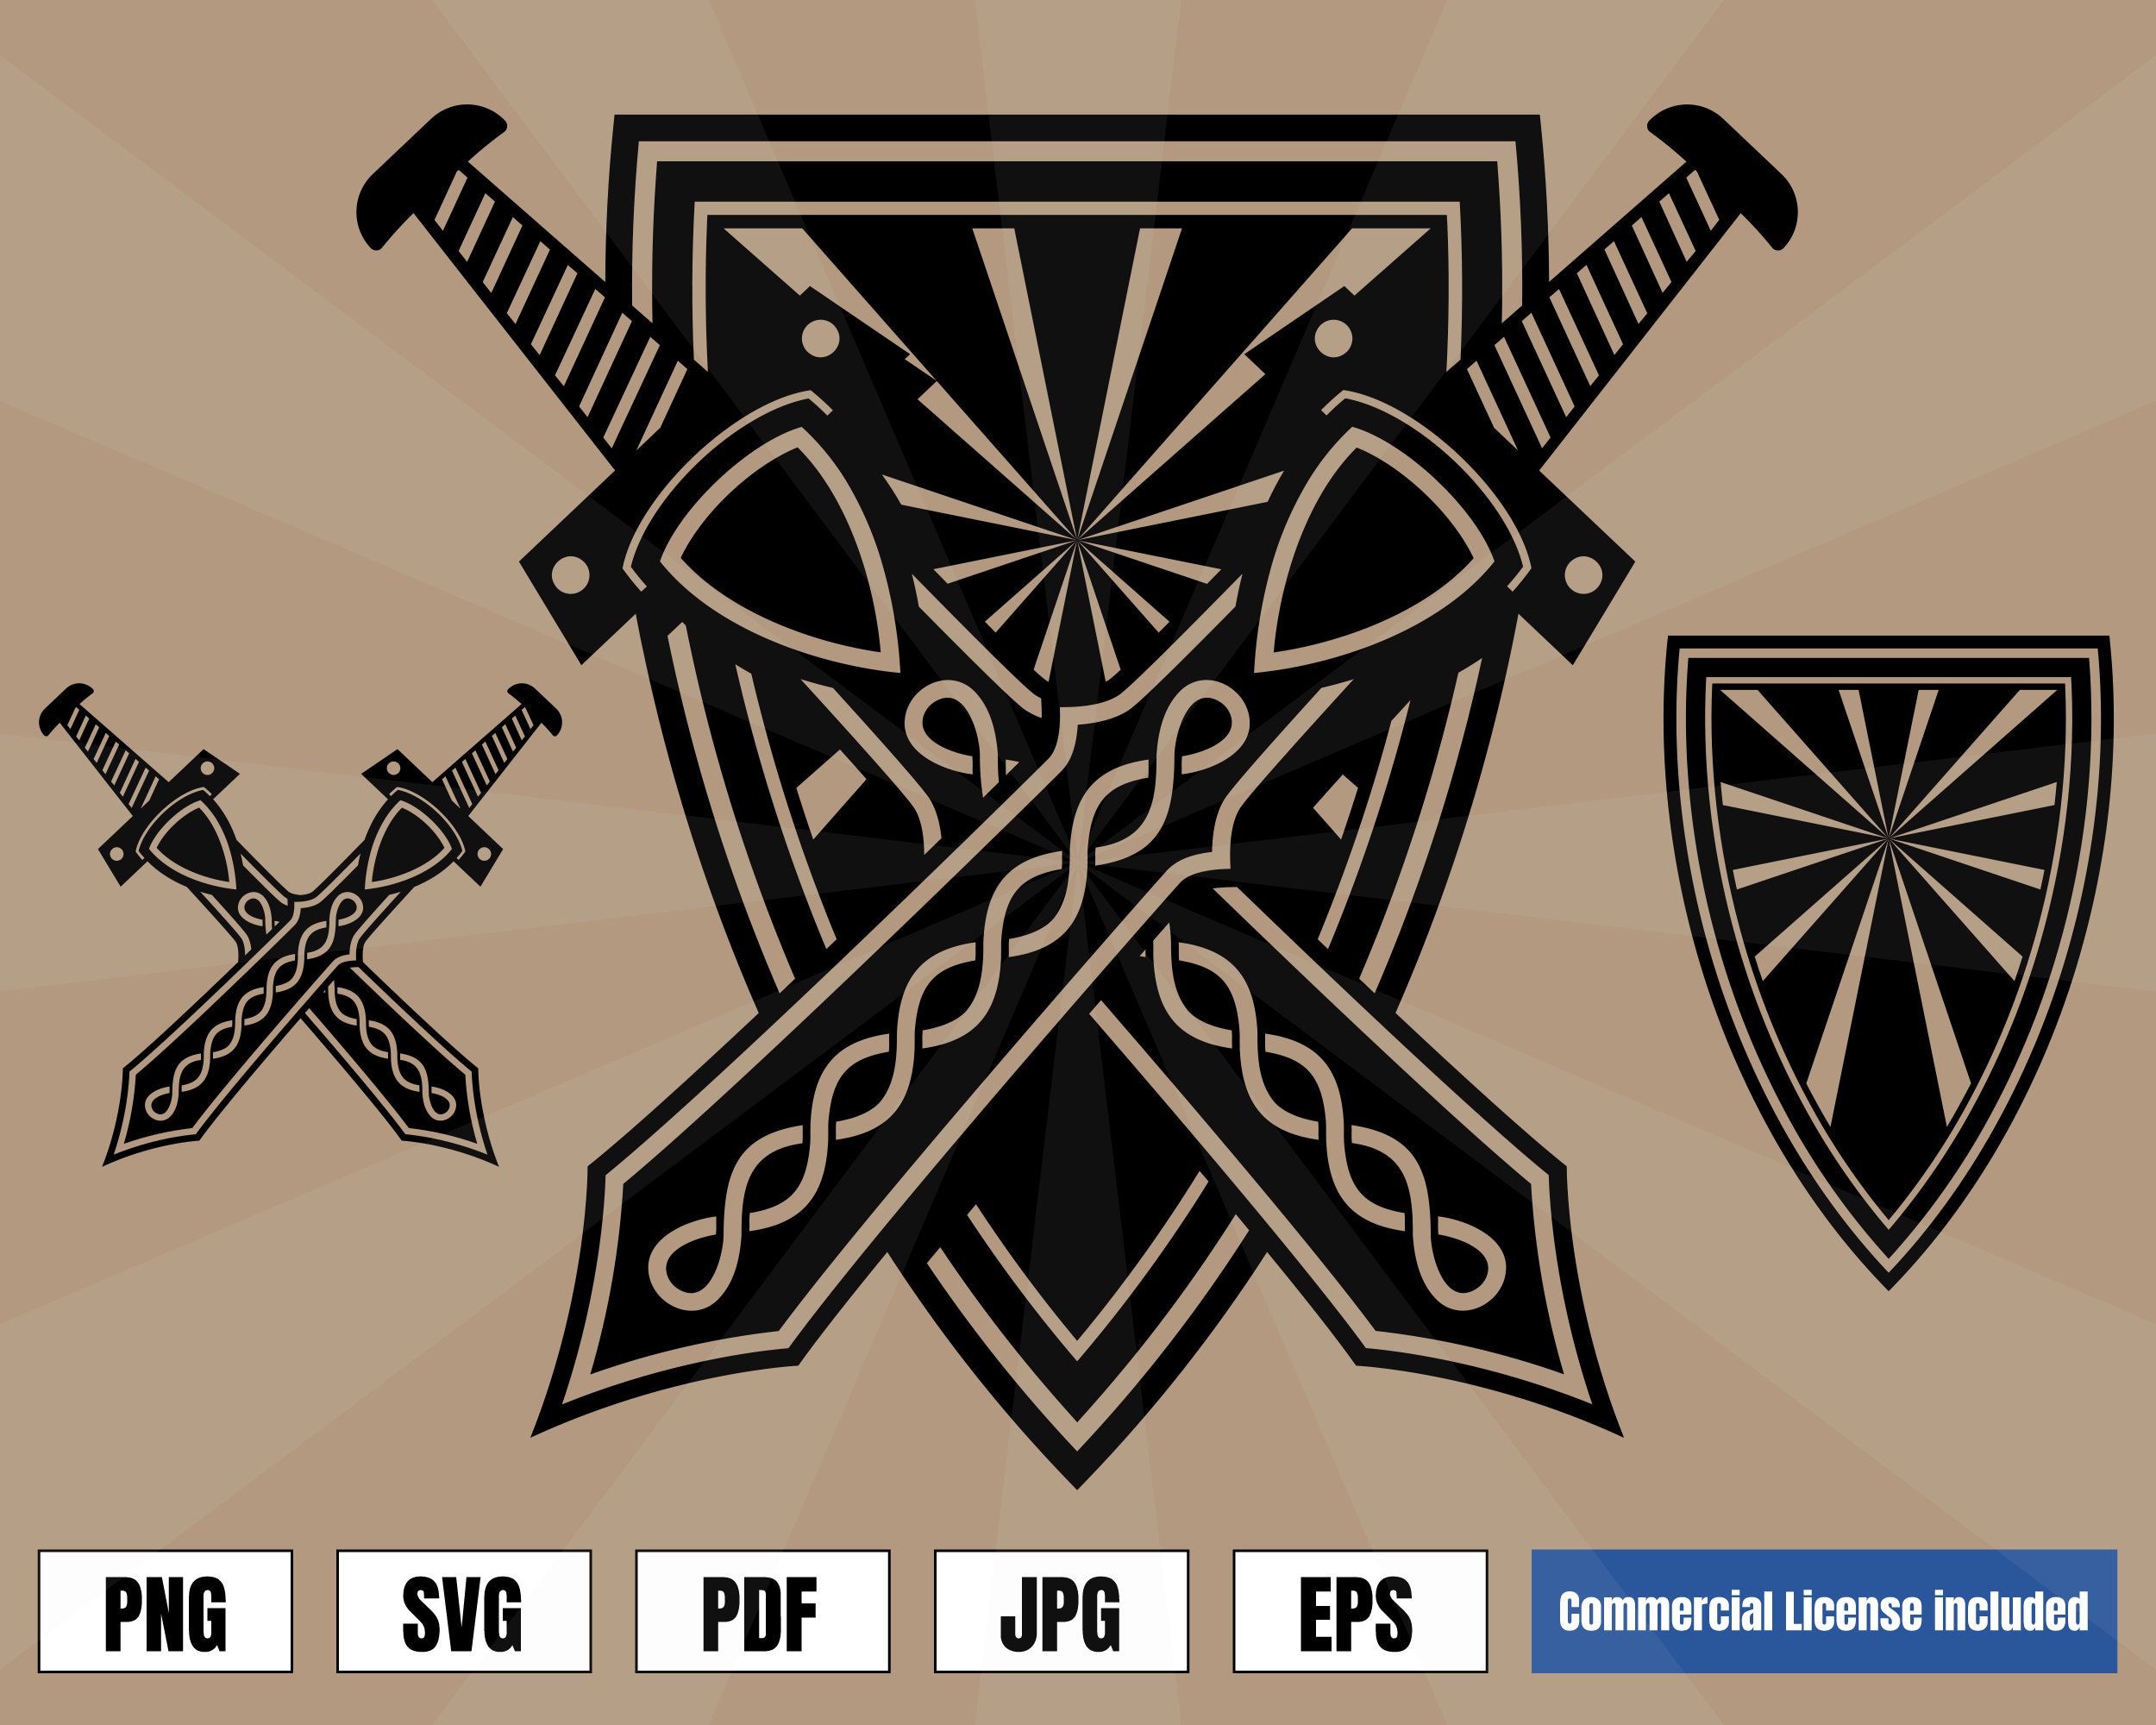 Viking Shield and Swords Coat of Arms Norse Art Logo .svg .png | Etsy